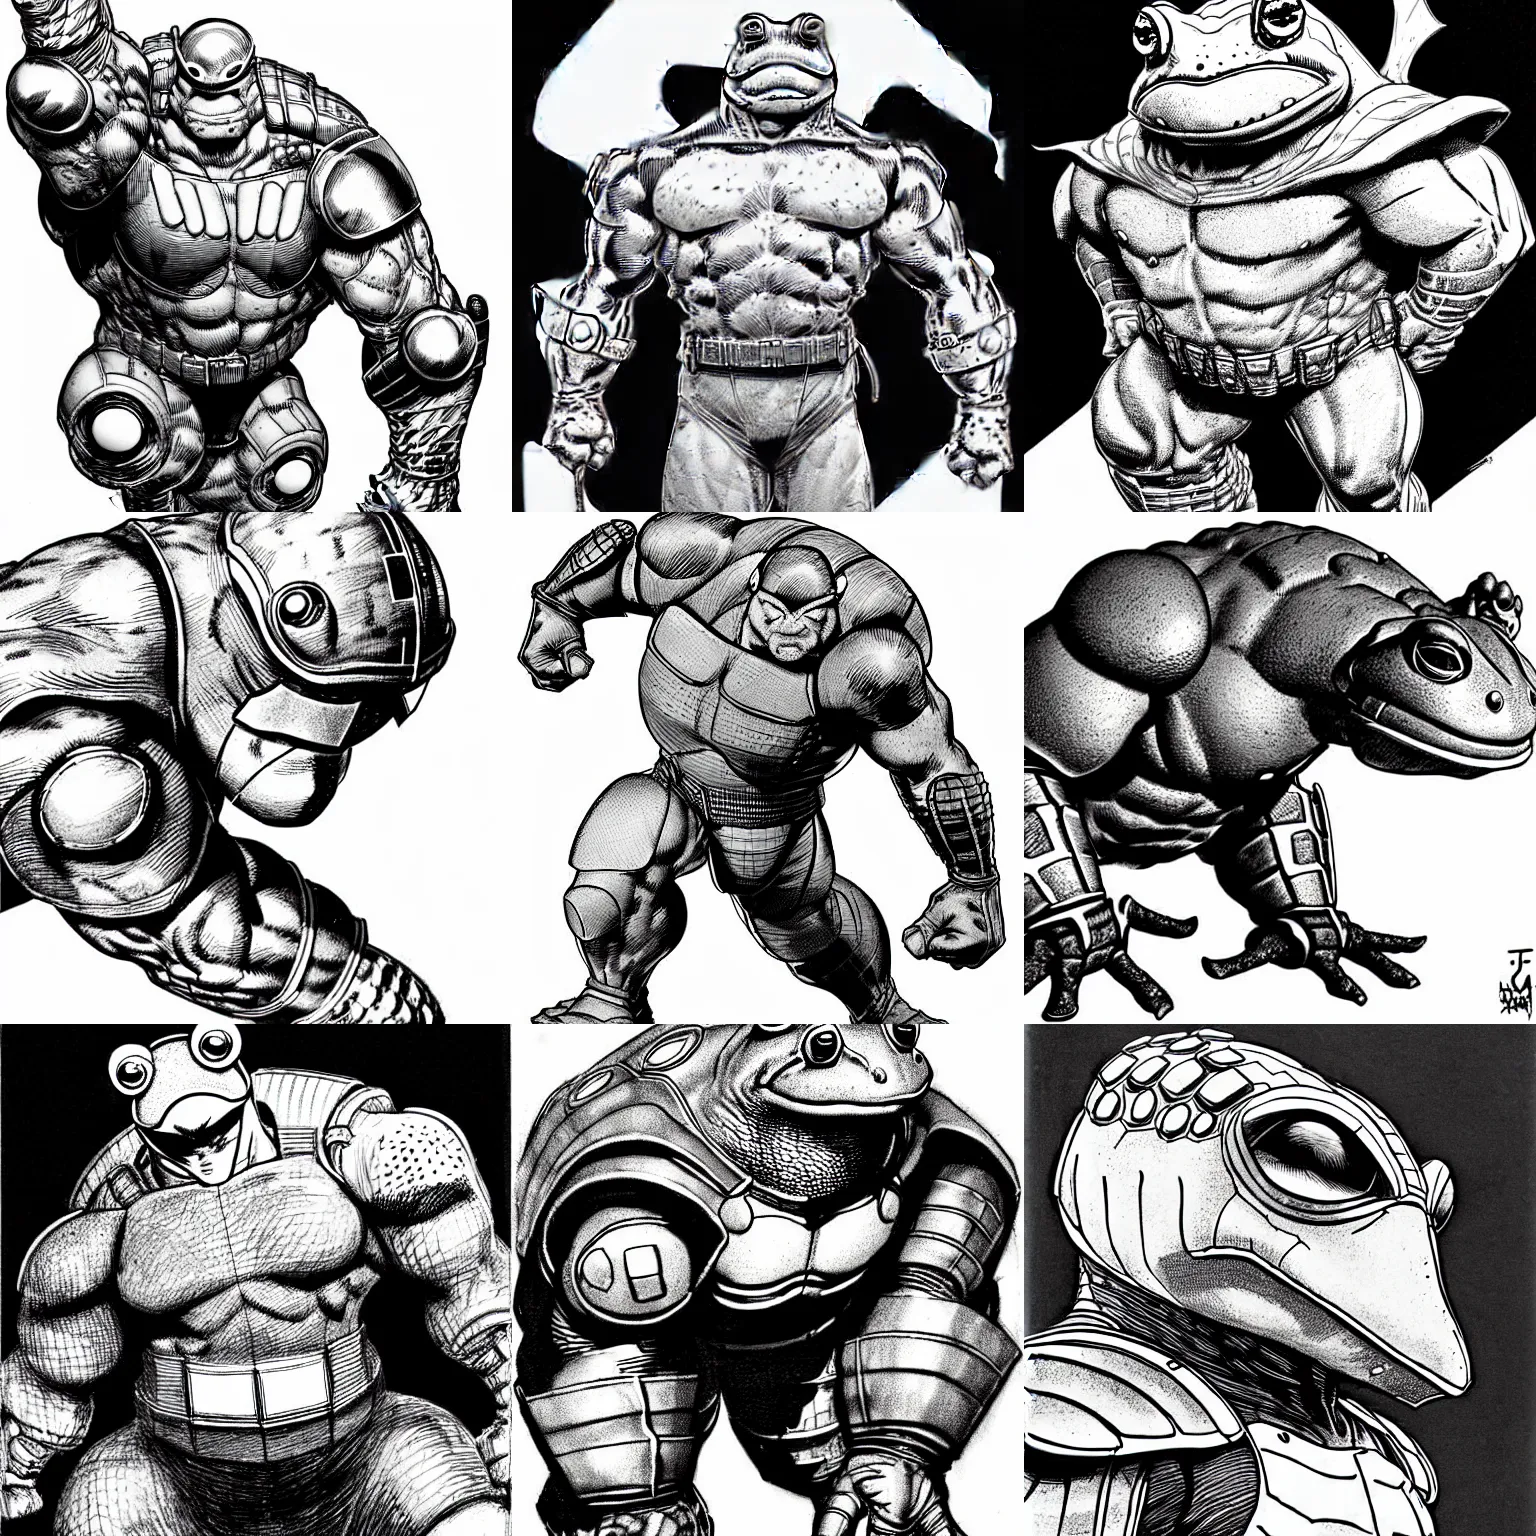 Prompt: toad animal!!! jim lee!!! sideview full shot!! flat grayscale ink sketch by jim lee close up in the style of jim lee, ( attention pose ) cyborg! battle armor rugged knight hulk toad animal superhero by jim lee